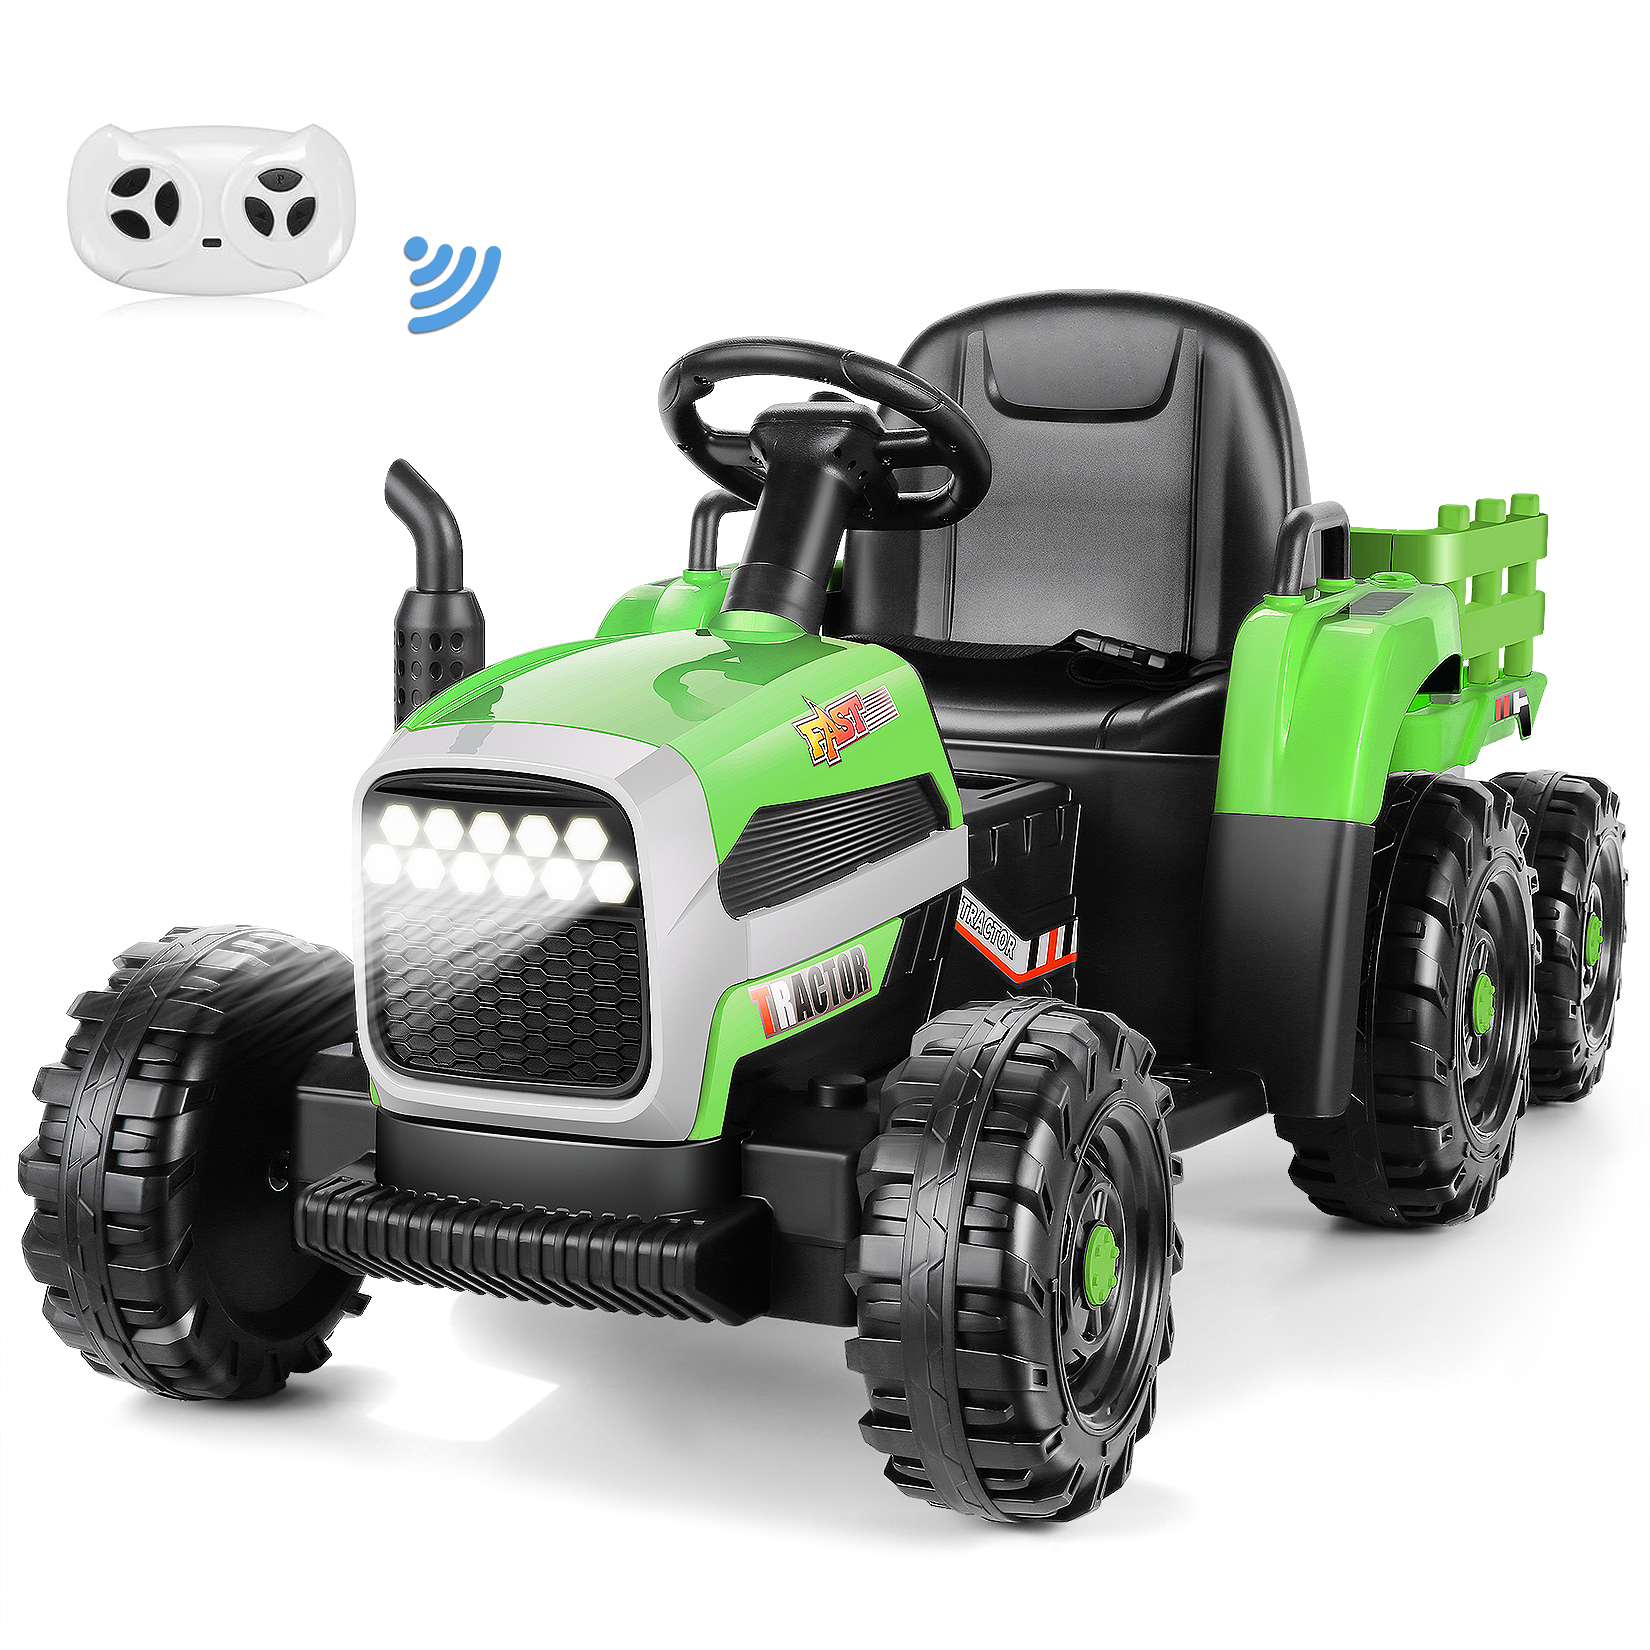 Funcid 12V Kids Ride on Tractor with Trailer